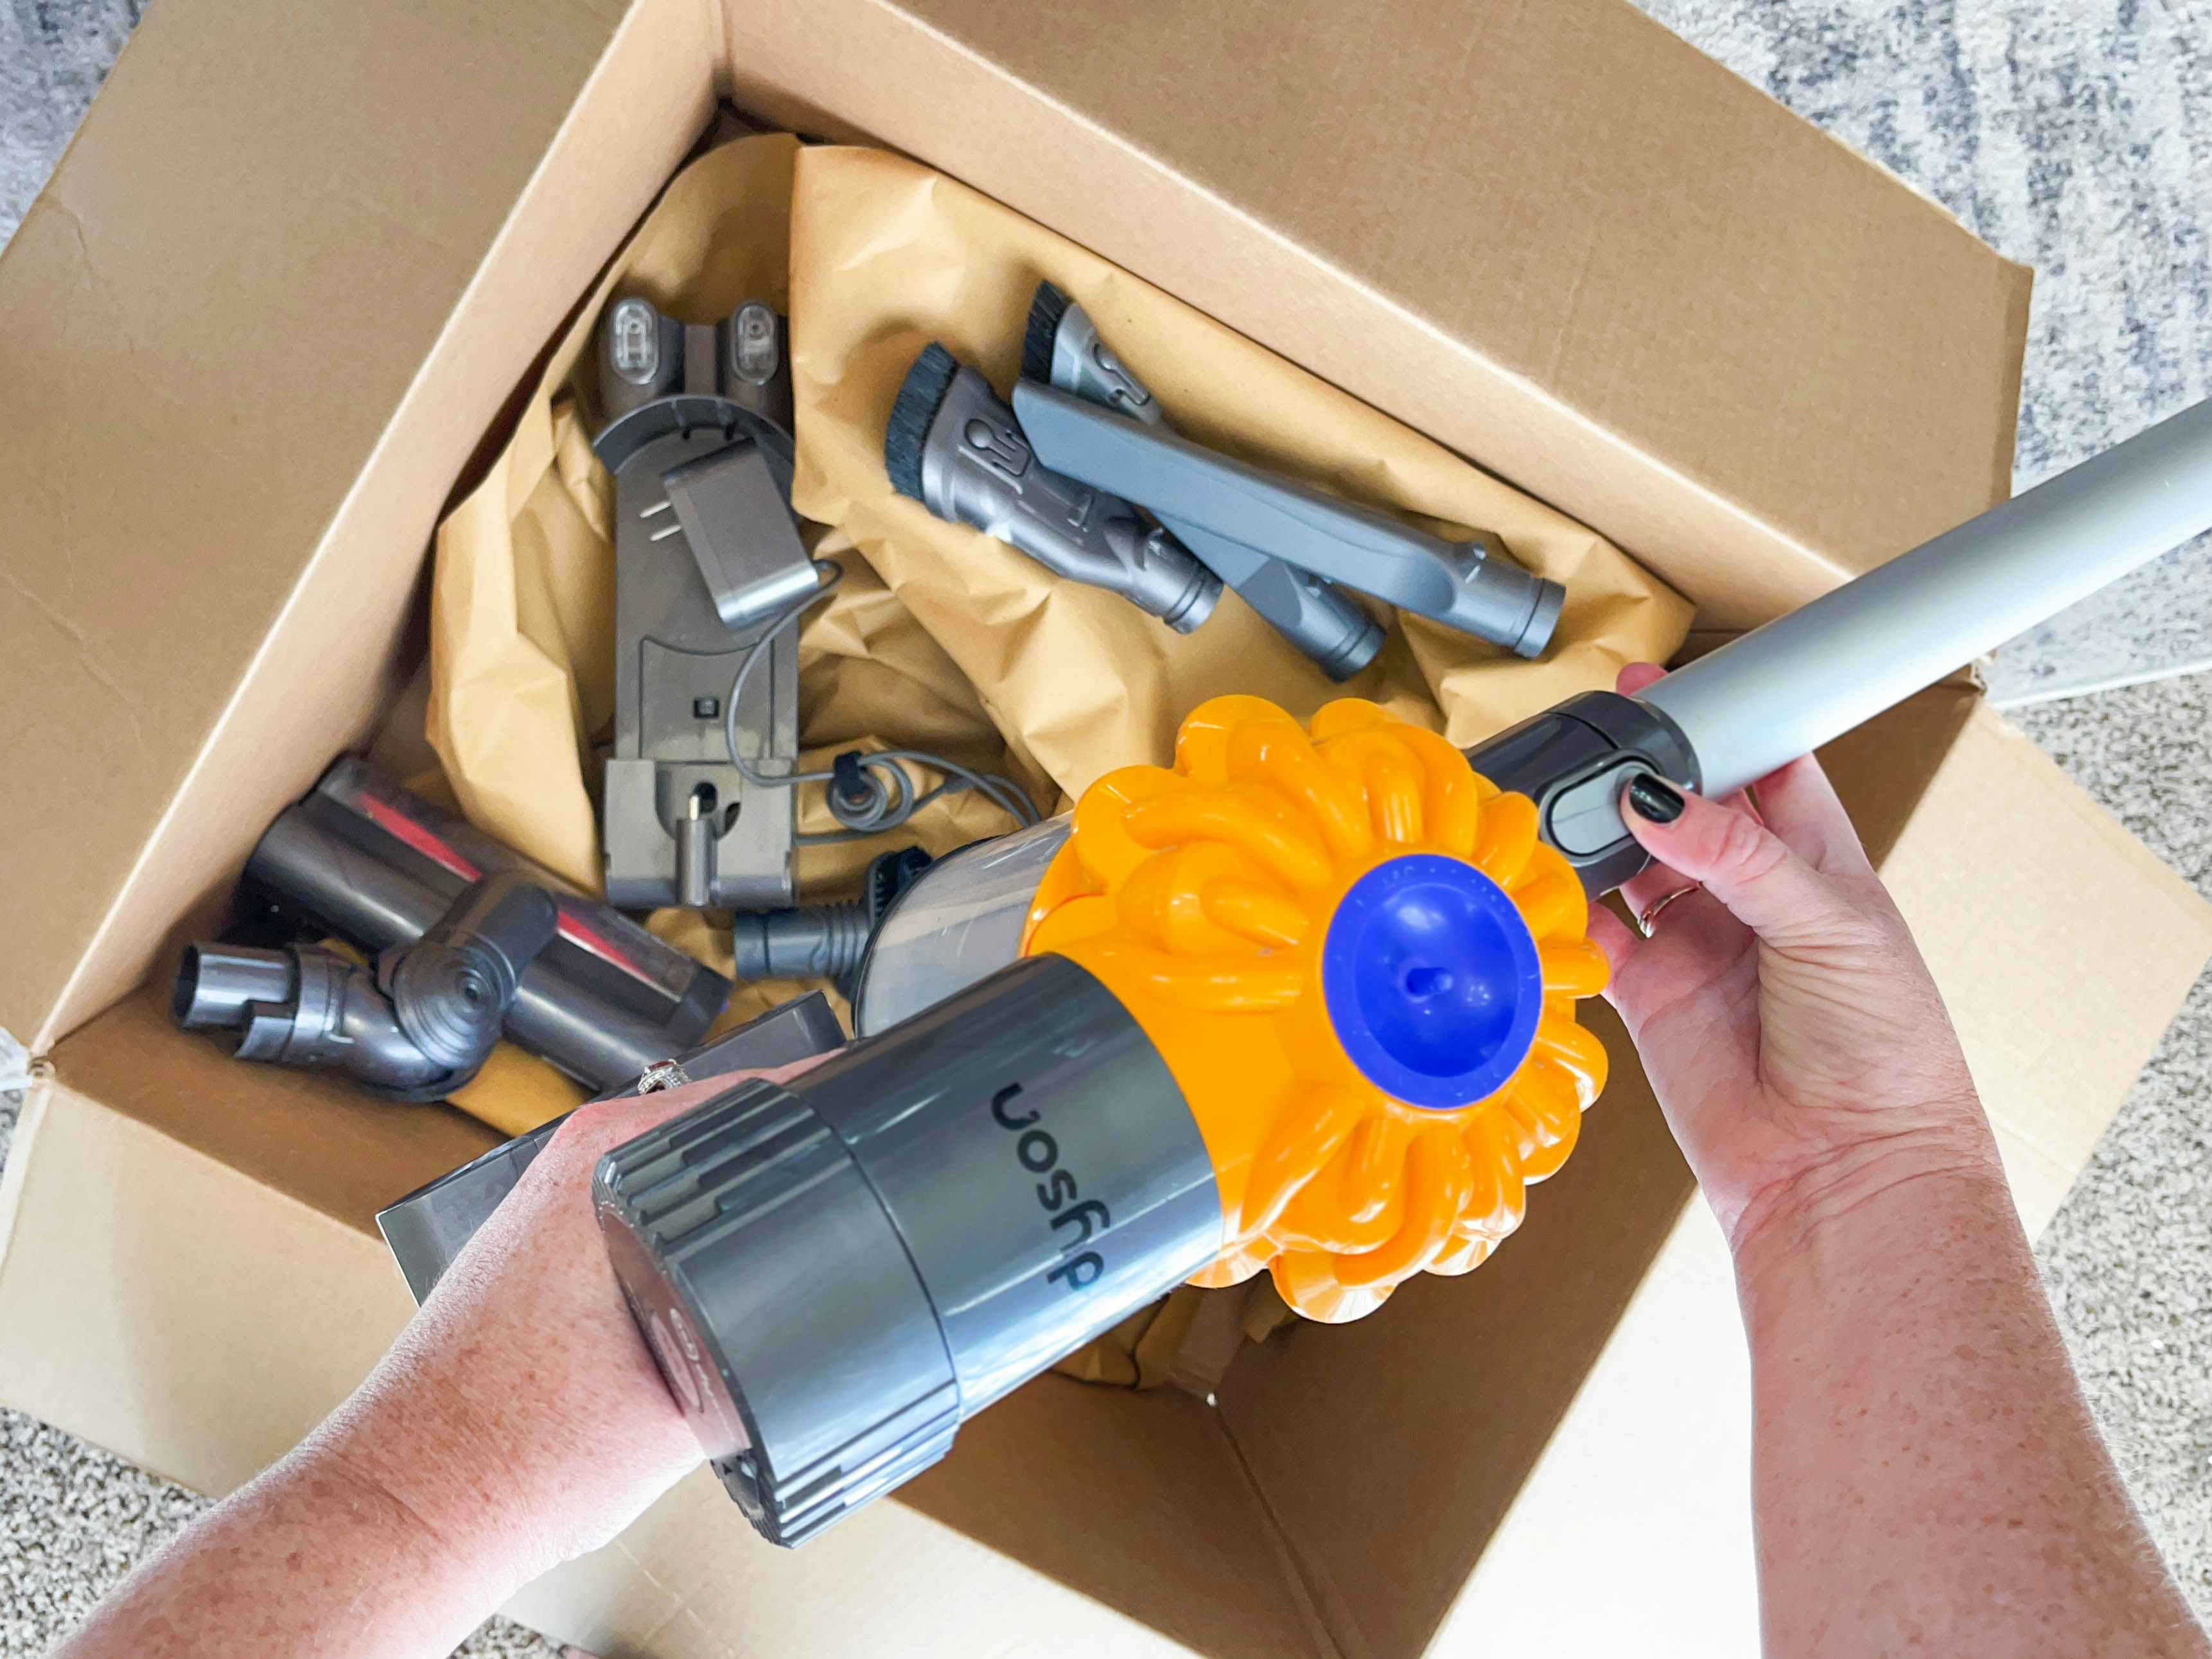 a person's hands putting together a dyson vacuum together from parts in a box on the ground